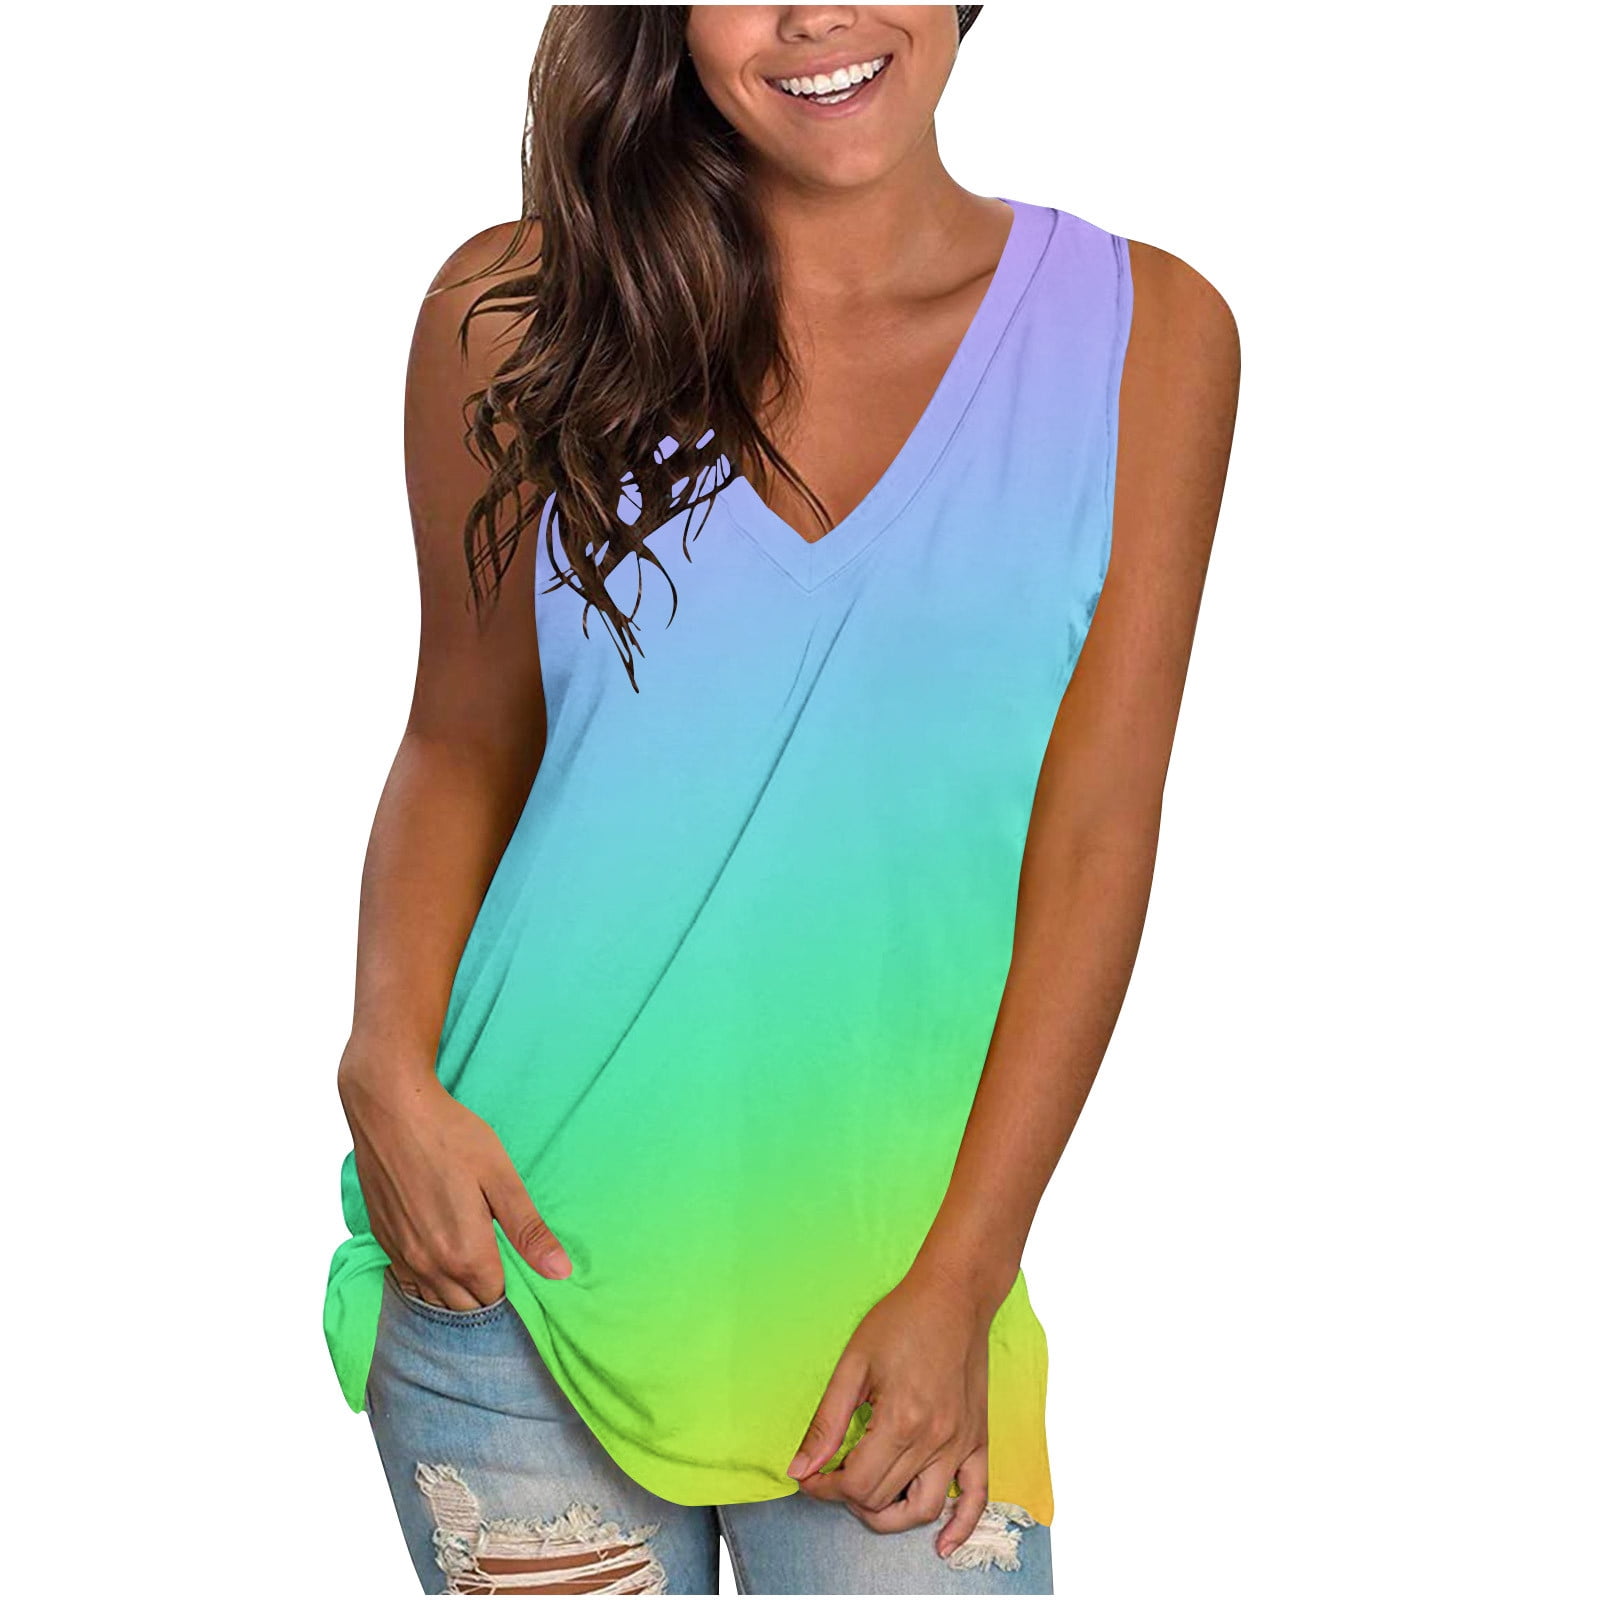 Lenago Womens Tops Clearance Under $5 Tank Tops for Women Plus Size ...